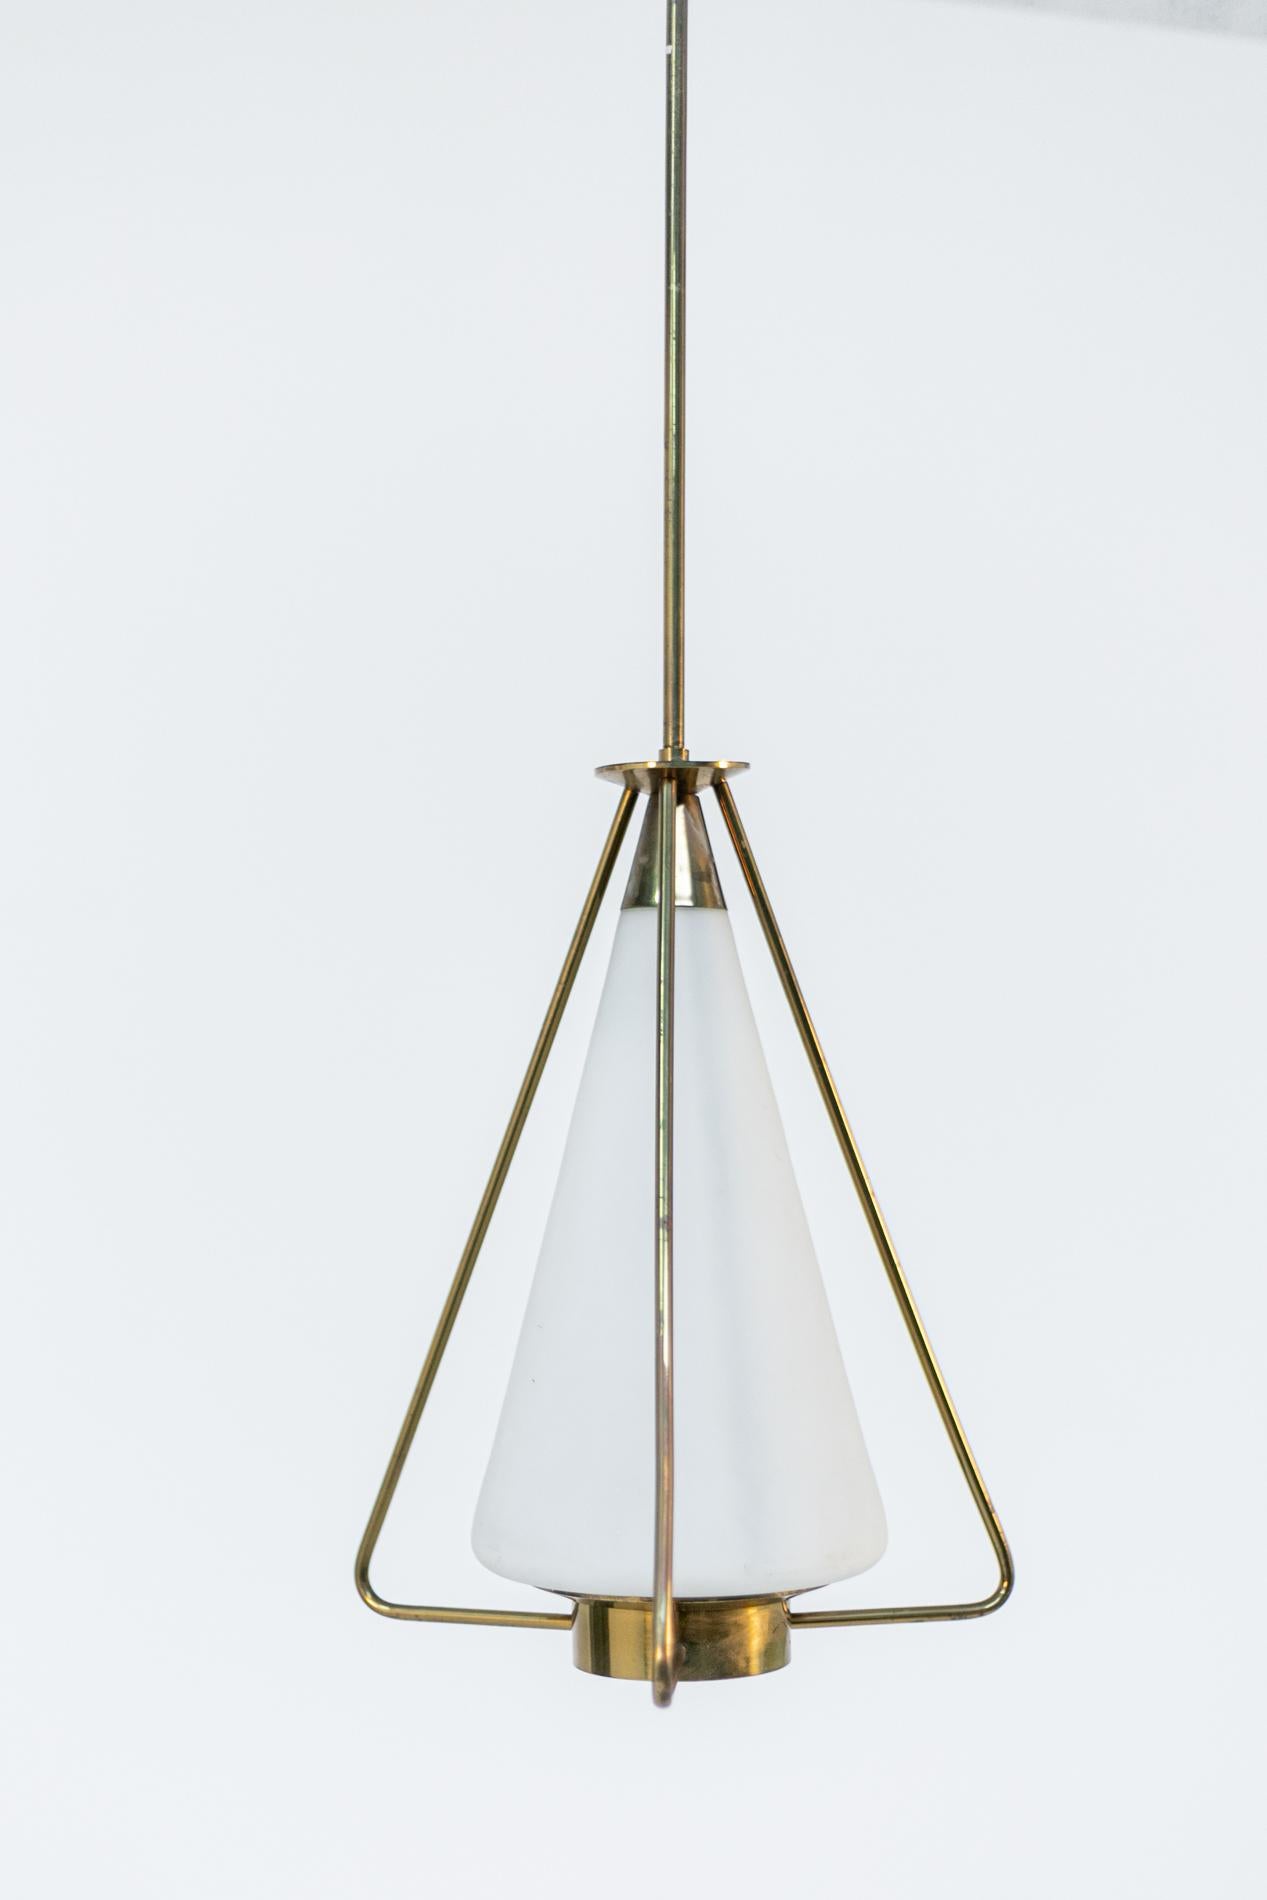 Mid-20th Century Italian Pendant by Stilnovo in Brass and Opaline Glass